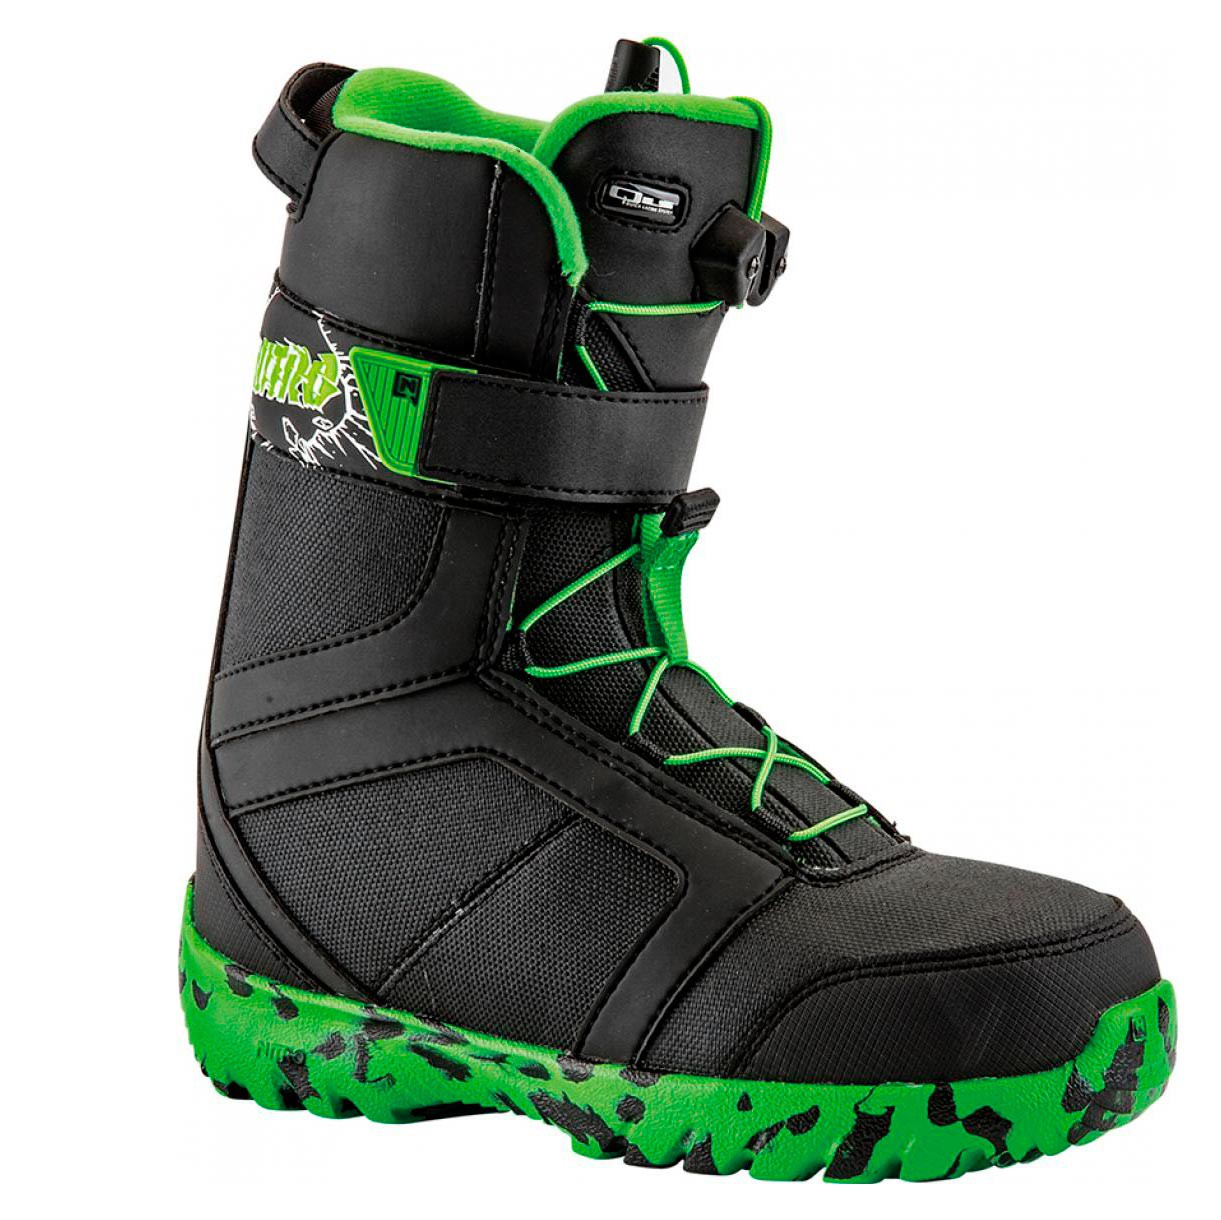 under armour snowboard boots